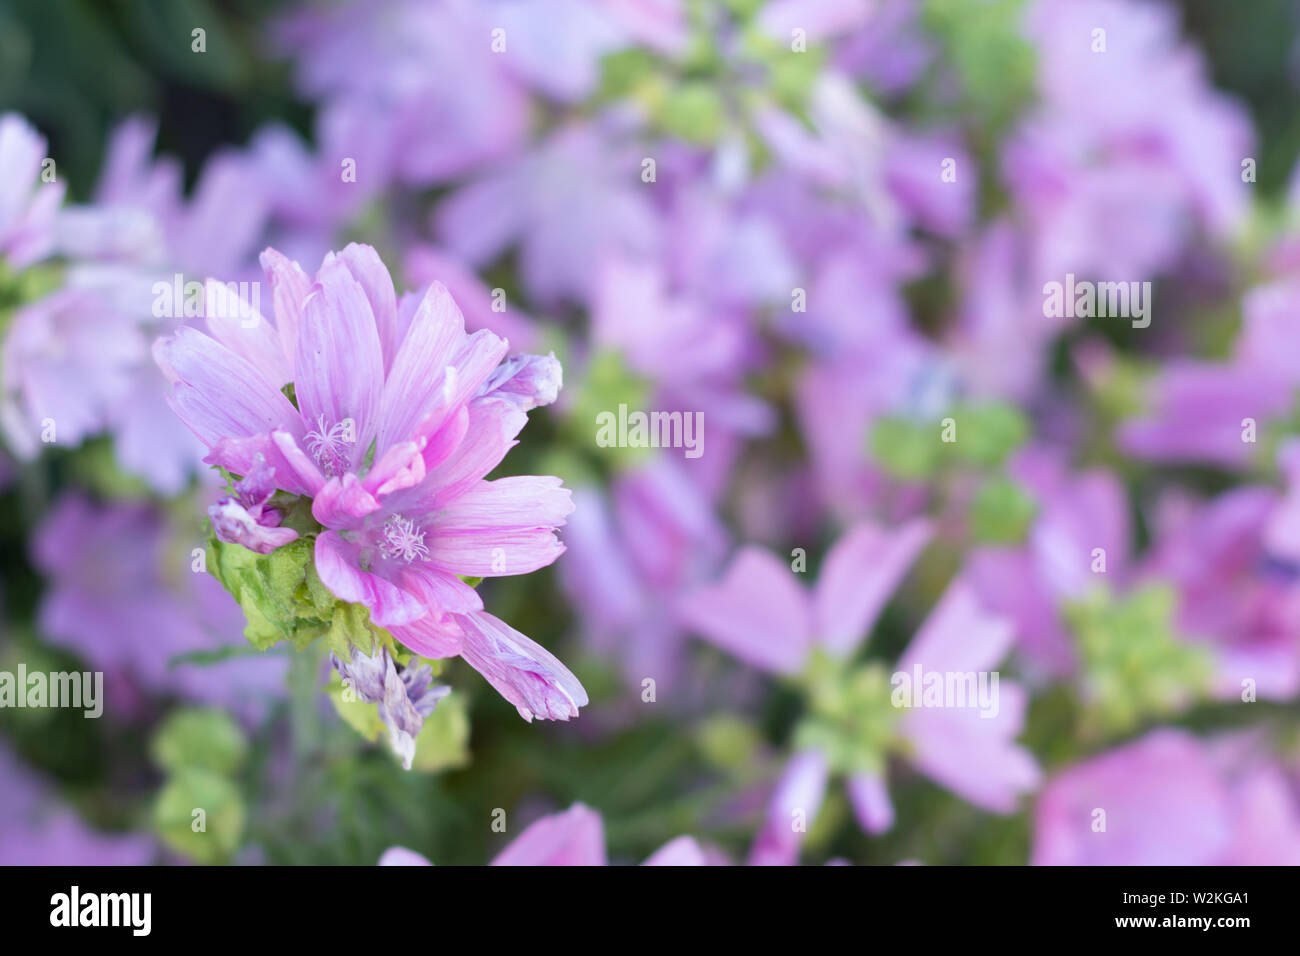 Pink musk mallow or Malva moschata blooming in the summer garden Stock Photo